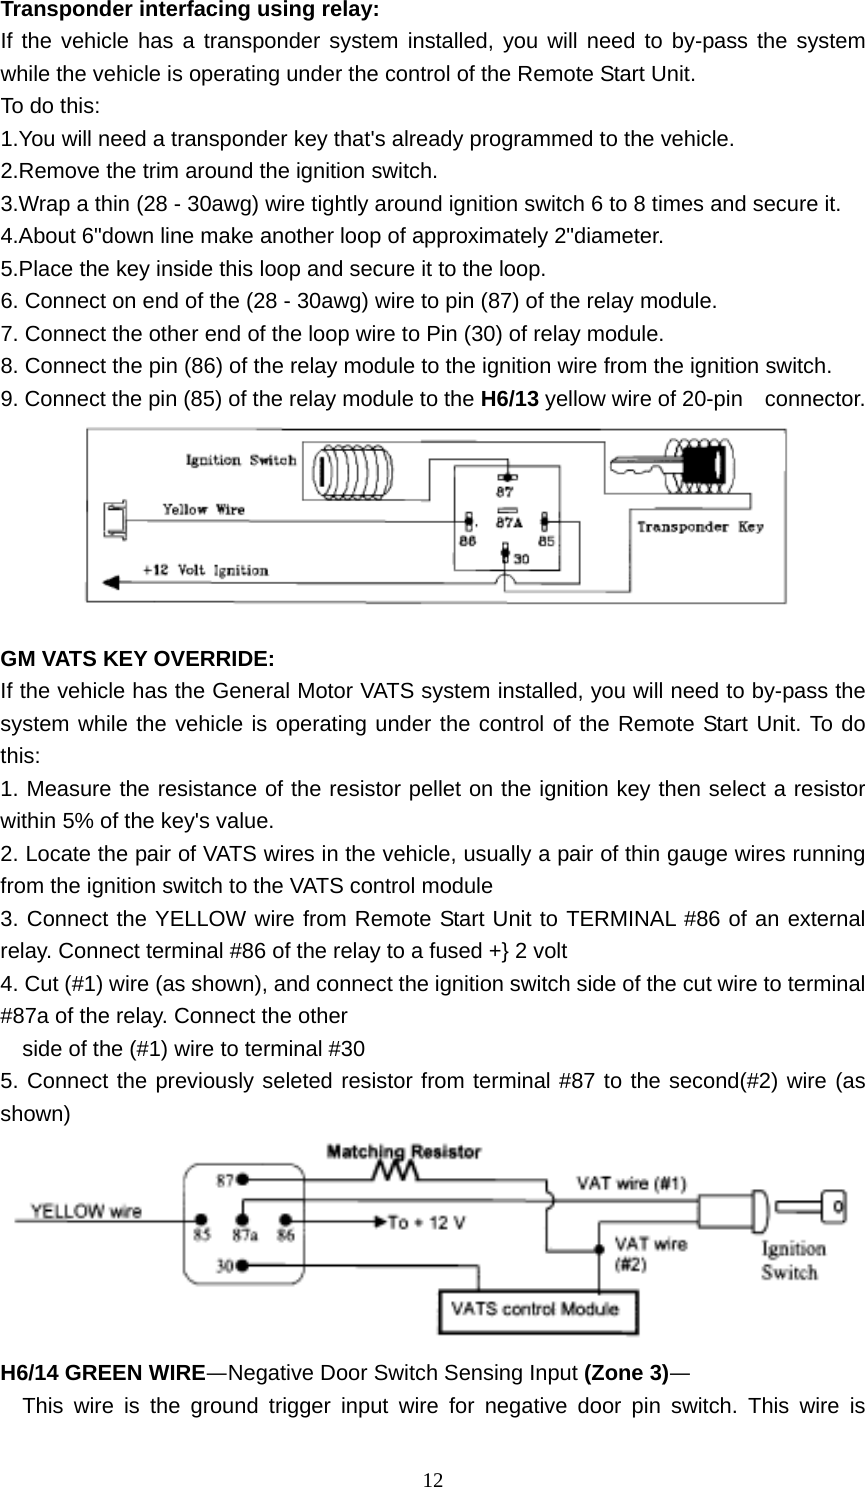  12Transponder interfacing using relay: If the vehicle has a transponder system installed, you will need to by-pass the system while the vehicle is operating under the control of the Remote Start Unit. To do this: 1.You will need a transponder key that&apos;s already programmed to the vehicle. 2.Remove the trim around the ignition switch. 3.Wrap a thin (28 - 30awg) wire tightly around ignition switch 6 to 8 times and secure it. 4.About 6&quot;down line make another loop of approximately 2&quot;diameter. 5.Place the key inside this loop and secure it to the loop. 6. Connect on end of the (28 - 30awg) wire to pin (87) of the relay module. 7. Connect the other end of the loop wire to Pin (30) of relay module. 8. Connect the pin (86) of the relay module to the ignition wire from the ignition switch. 9. Connect the pin (85) of the relay module to the H6/13 yellow wire of 20-pin    connector.   GM VATS KEY OVERRIDE: If the vehicle has the General Motor VATS system installed, you will need to by-pass the system while the vehicle is operating under the control of the Remote Start Unit. To do this: 1. Measure the resistance of the resistor pellet on the ignition key then select a resistor within 5% of the key&apos;s value. 2. Locate the pair of VATS wires in the vehicle, usually a pair of thin gauge wires running from the ignition switch to the VATS control module 3. Connect the YELLOW wire from Remote Start Unit to TERMINAL #86 of an external relay. Connect terminal #86 of the relay to a fused +} 2 volt 4. Cut (#1) wire (as shown), and connect the ignition switch side of the cut wire to terminal #87a of the relay. Connect the other     side of the (#1) wire to terminal #30 5. Connect the previously seleted resistor from terminal #87 to the second(#2) wire (as shown)  H6/14 GREEN WIRE—Negative Door Switch Sensing Input (Zone 3)— This wire is the ground trigger input wire for negative door pin switch. This wire is 